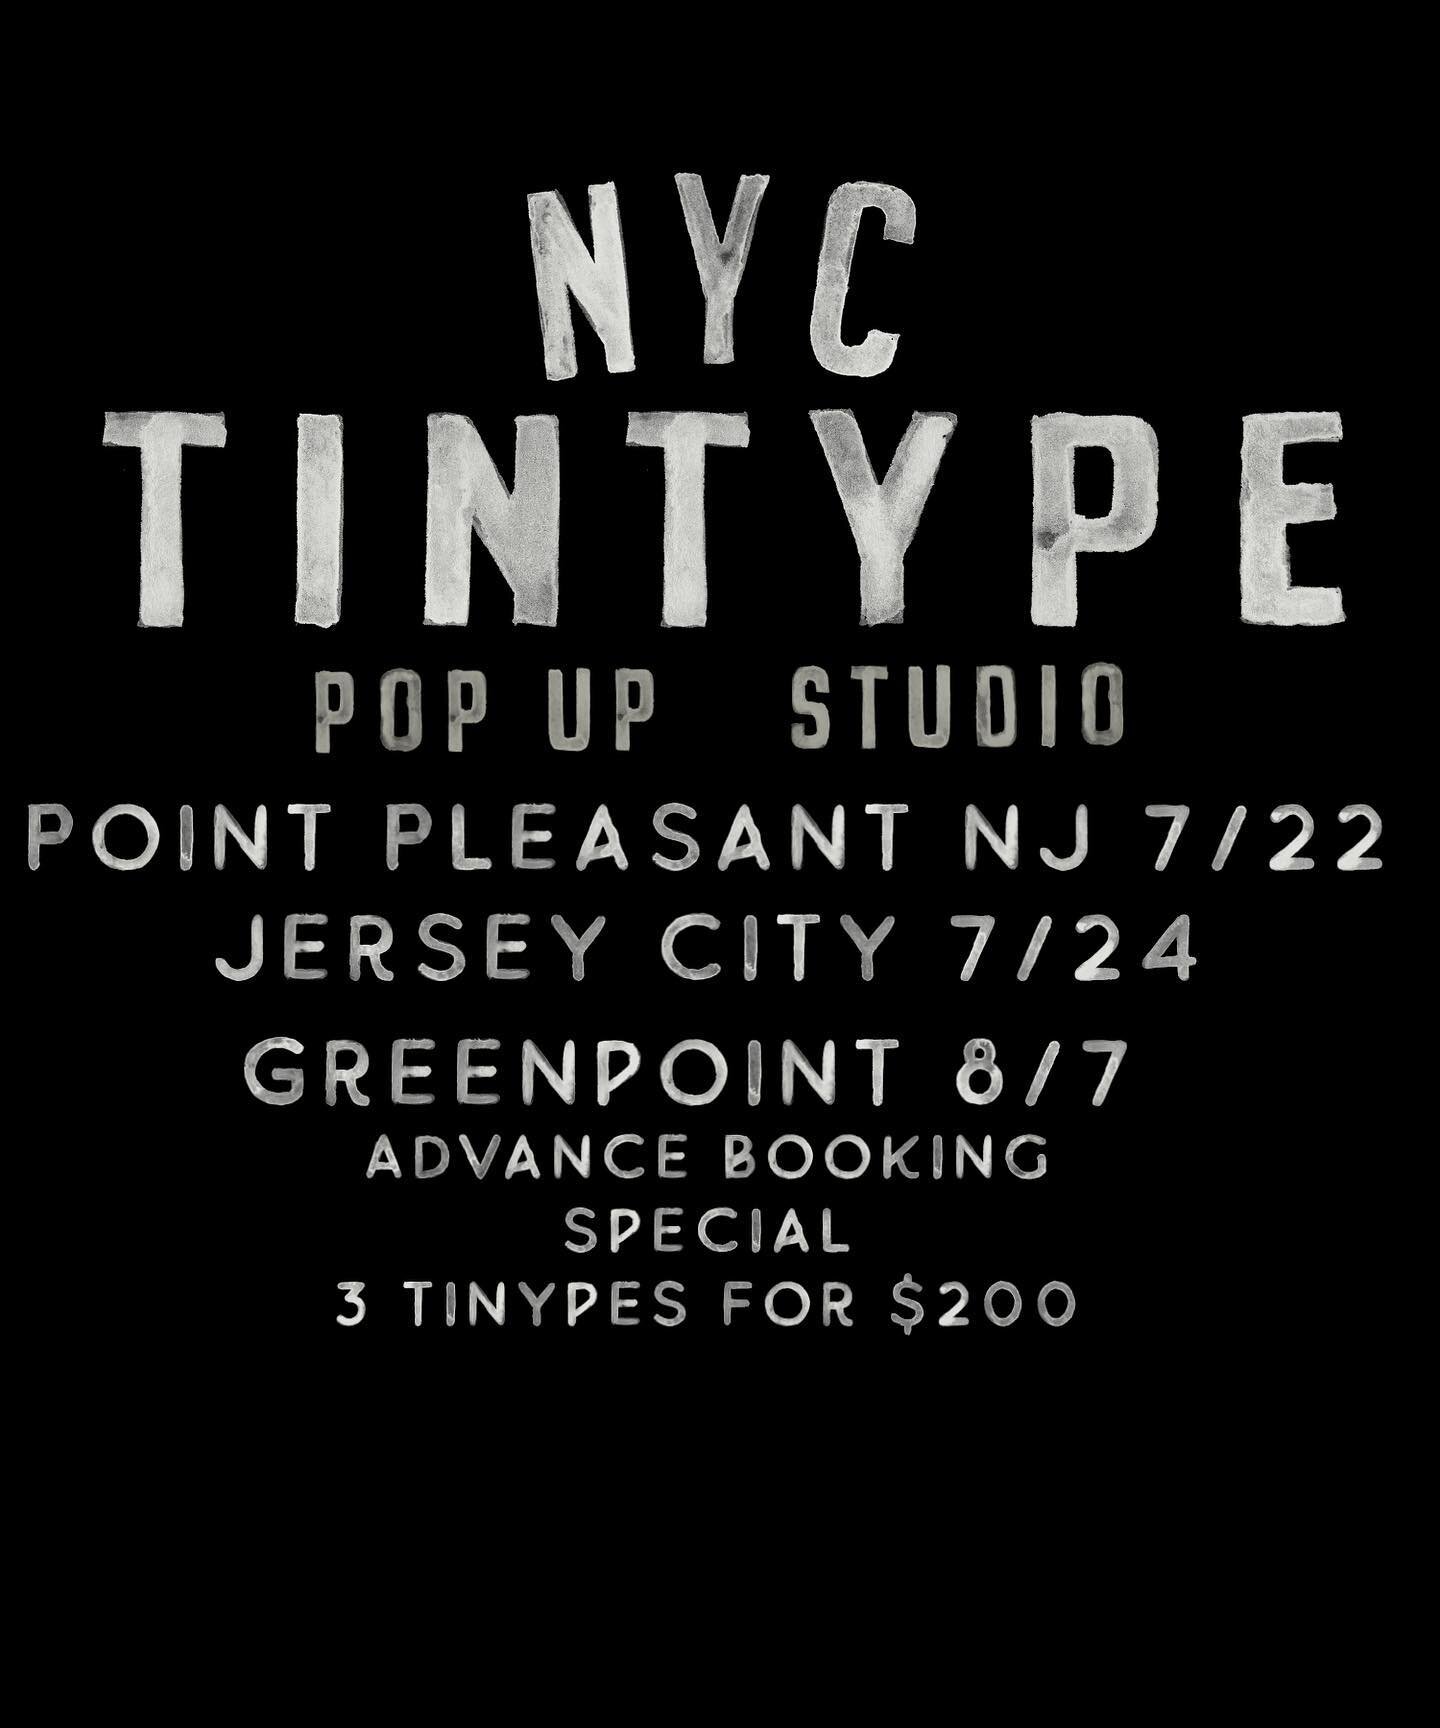 Lots of fun Tintype stuff happening! 
Go and book up your appointments at nyctinype.com or click on the product links!